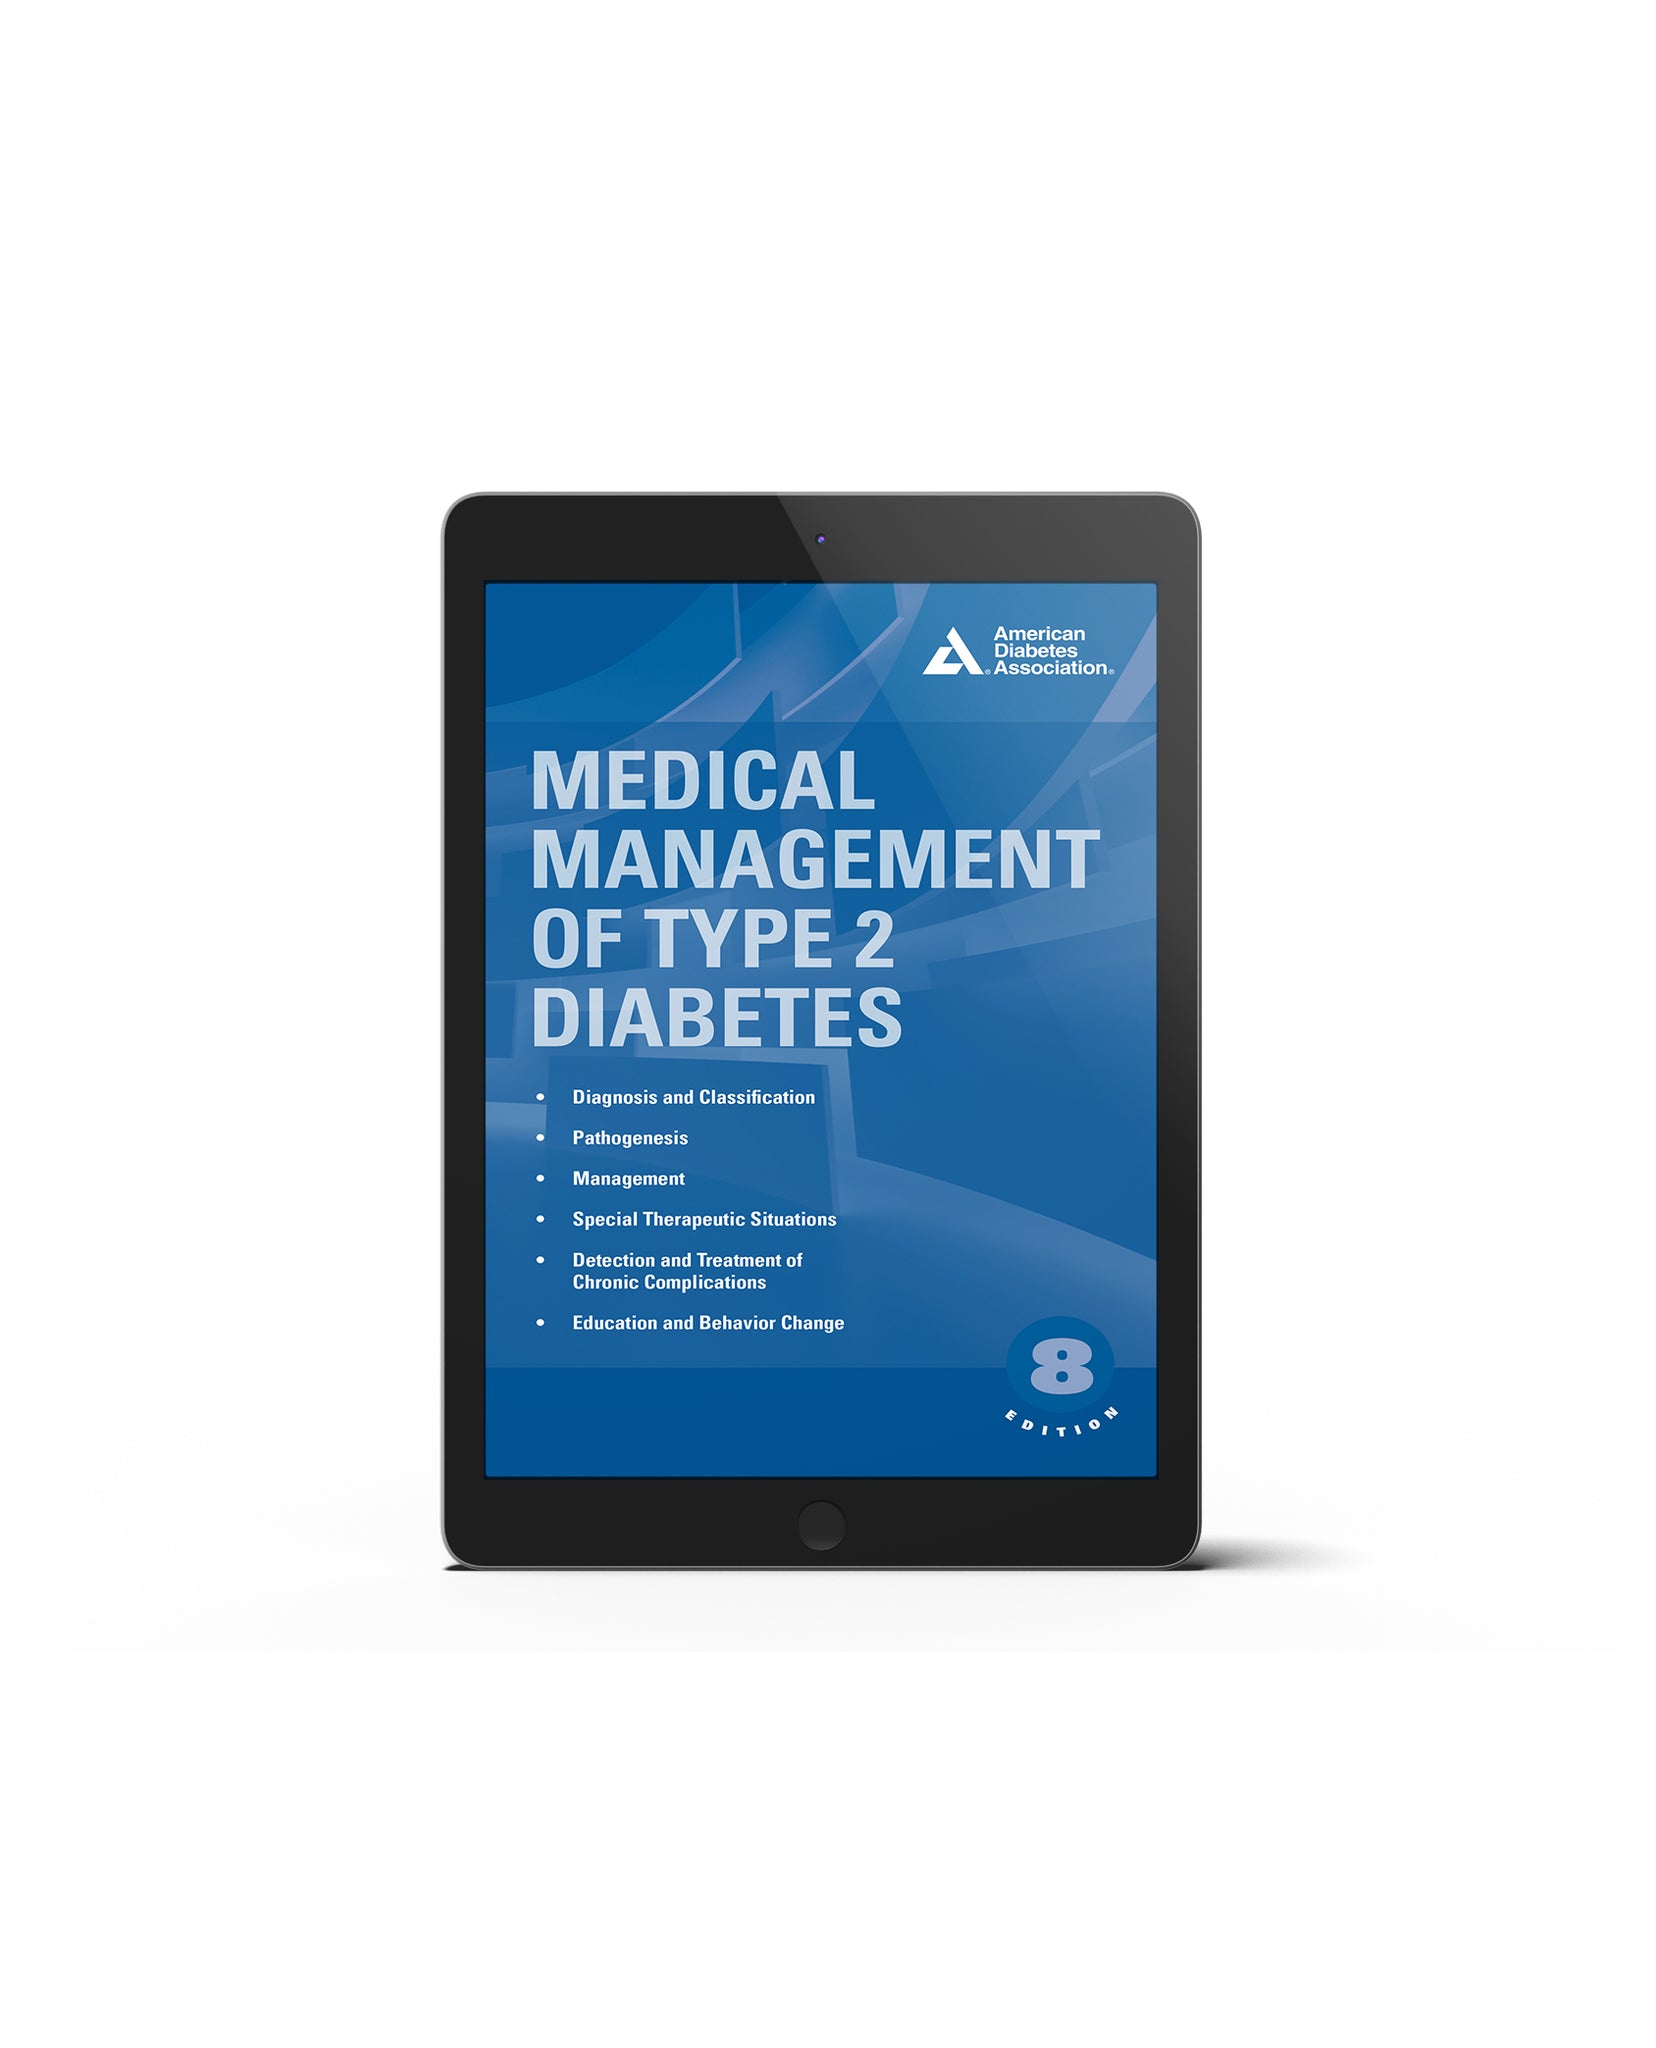 Medical Management of Type 2 Diabetes, 8th Edition – ShopDiabetes.org | Store the American Diabetes Association®